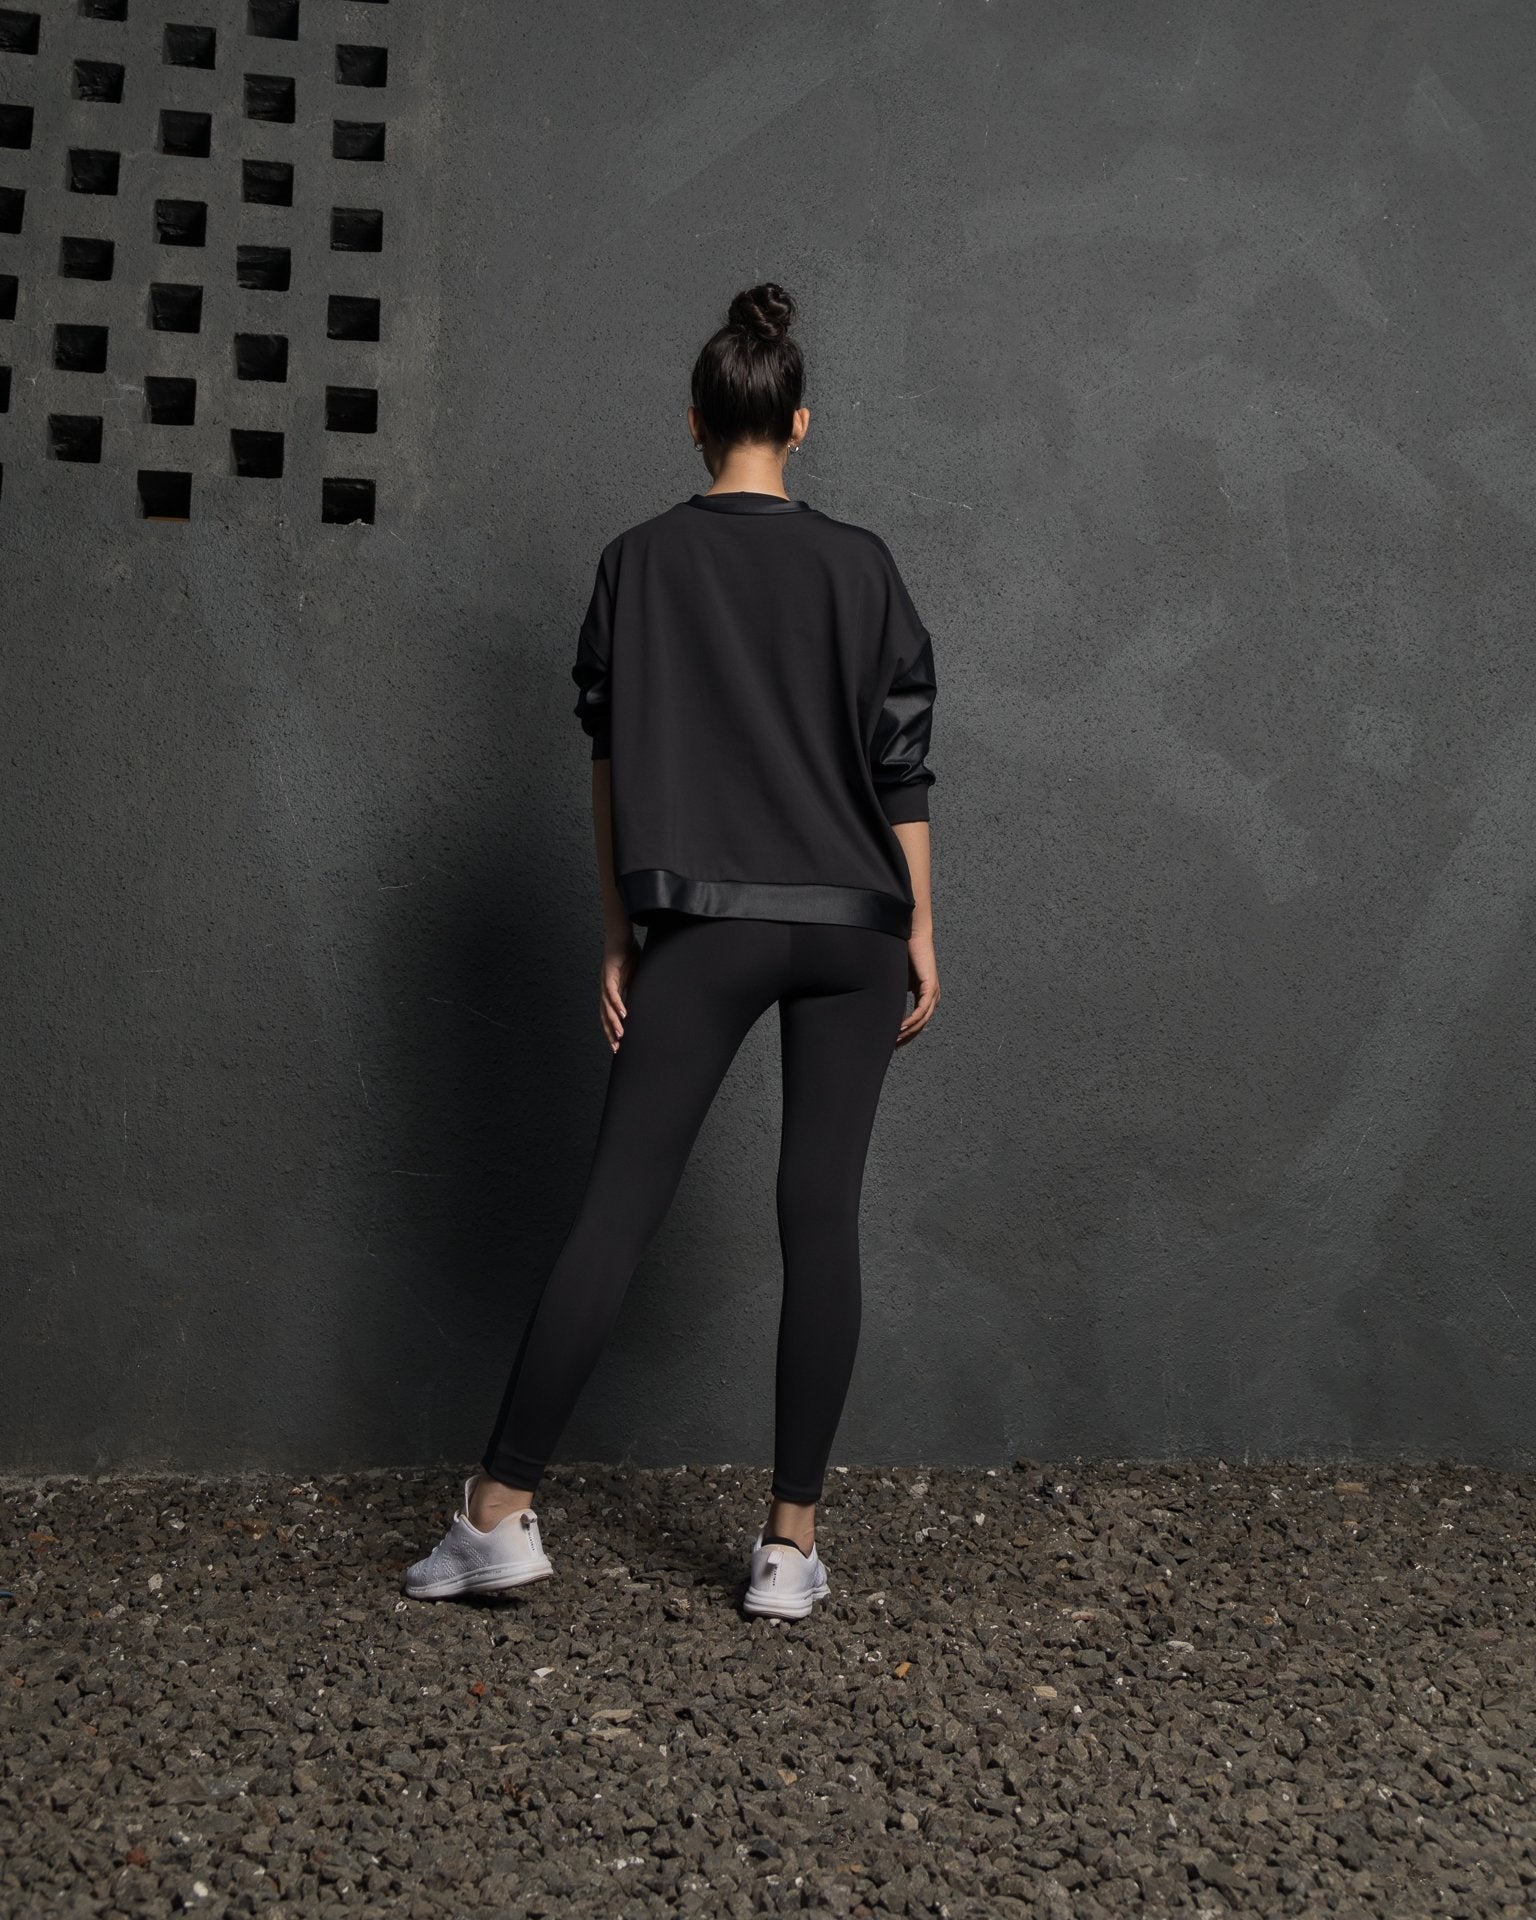 At Your Pace Legging in Onyx/ Eclipse